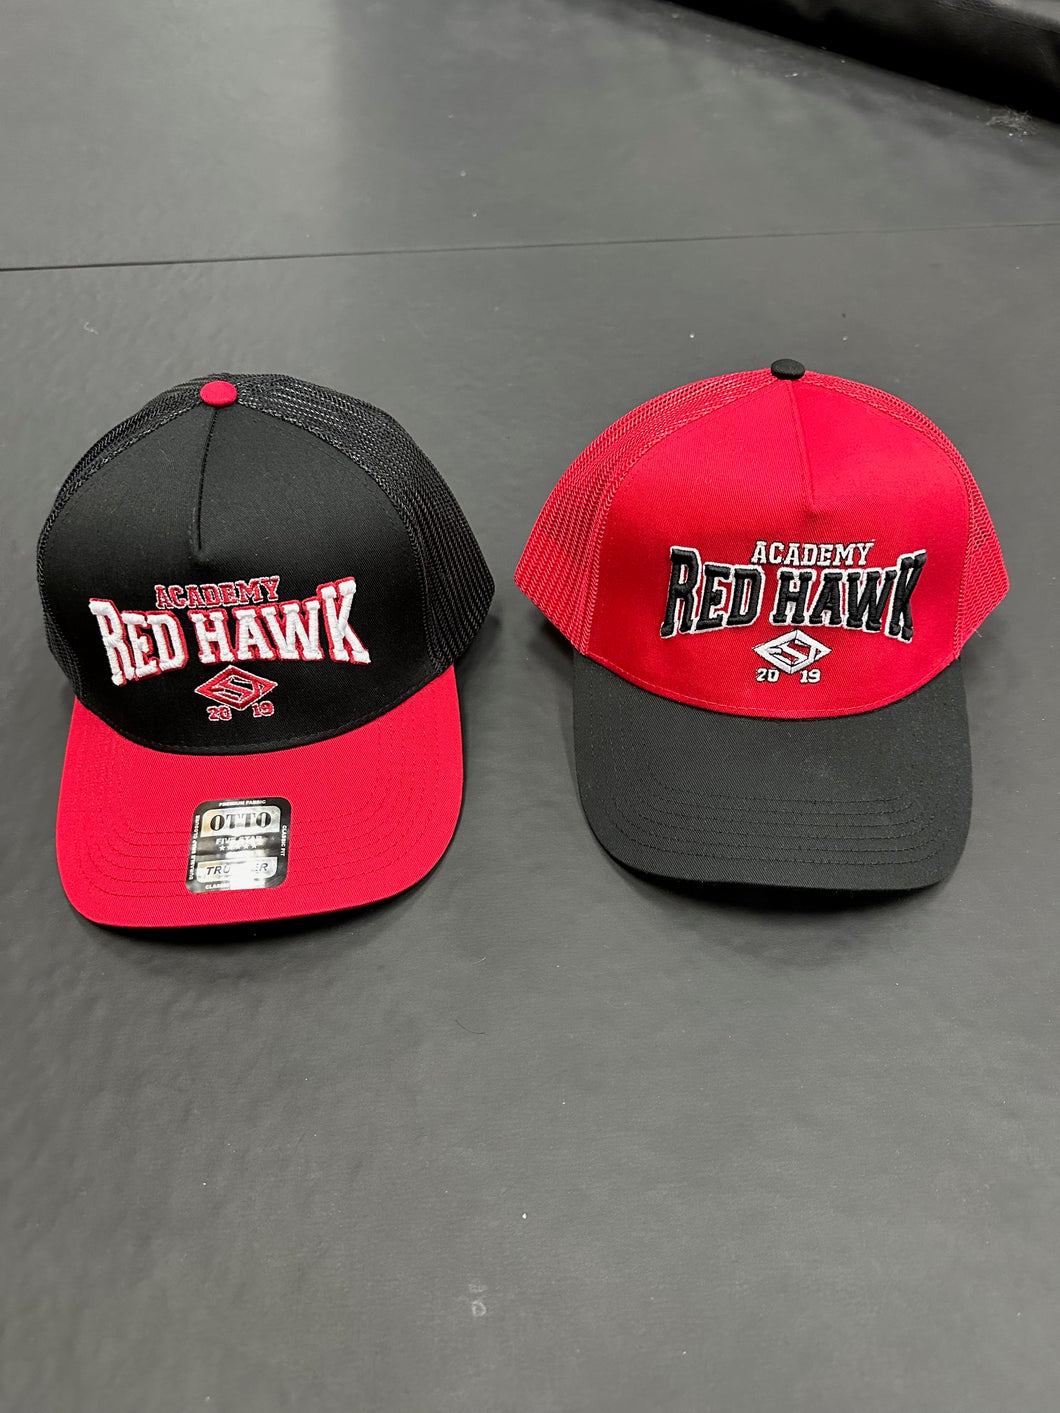 Black & Red Hats